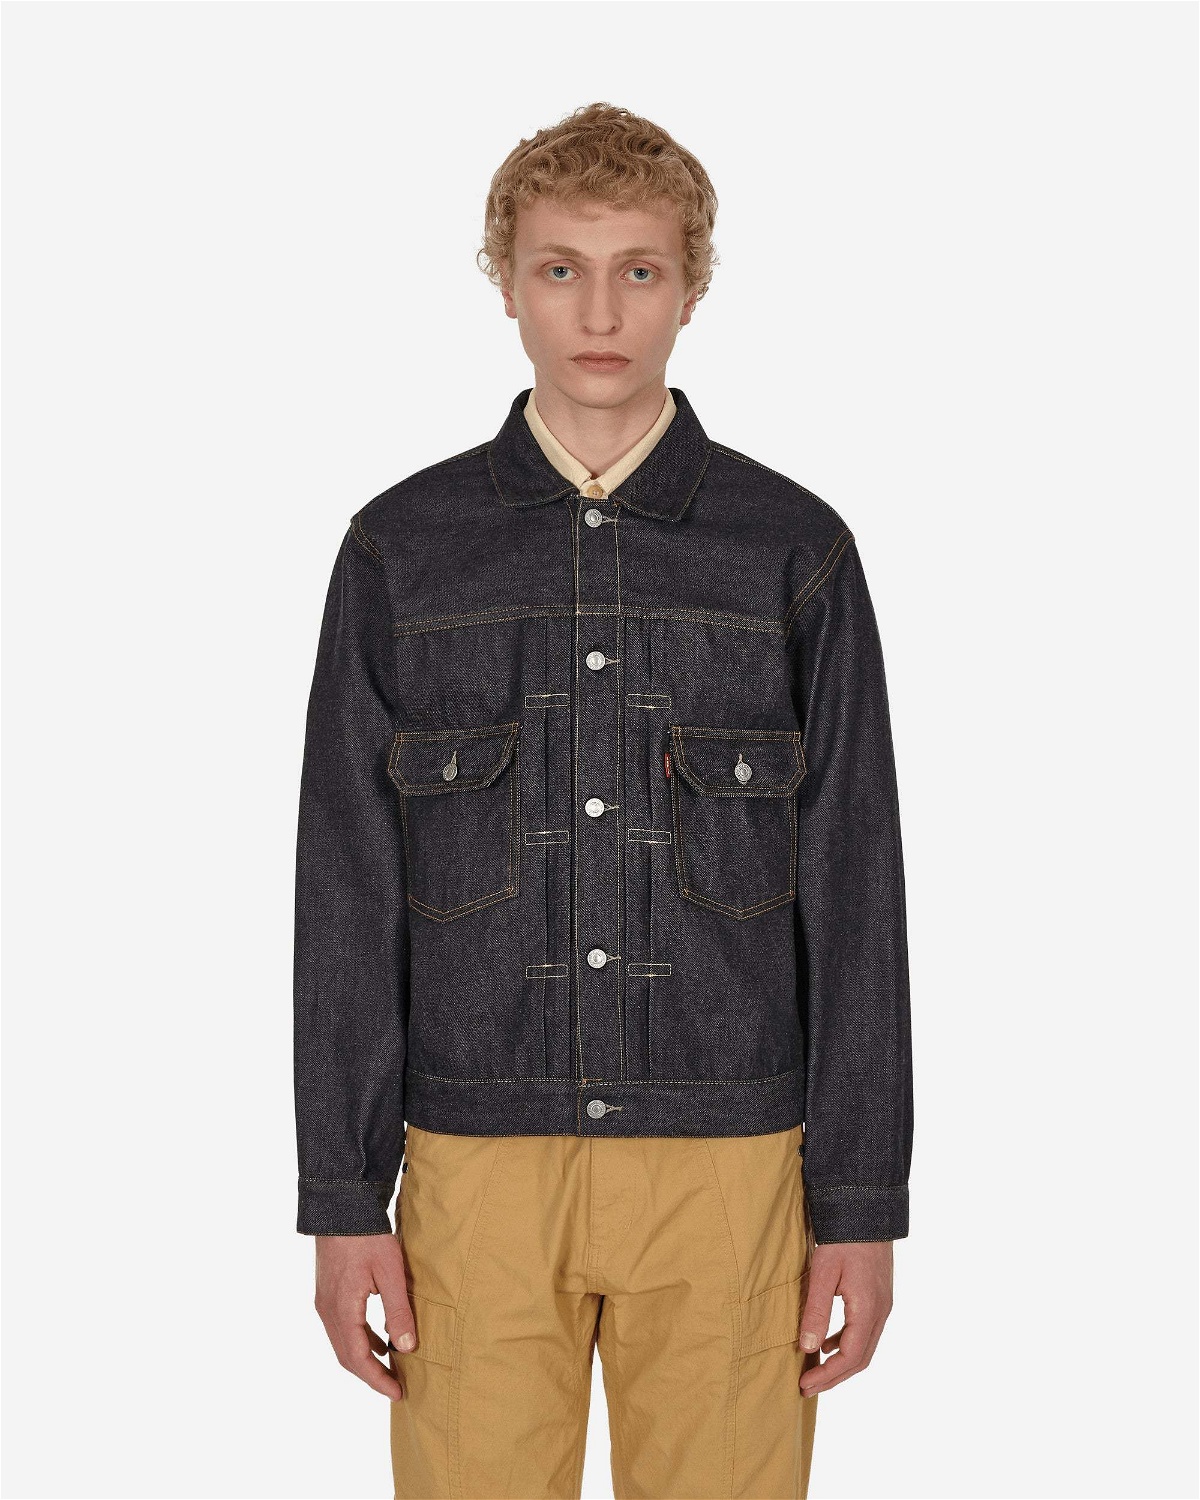 LVC 1953 Type II Jacket — Mello and Sons